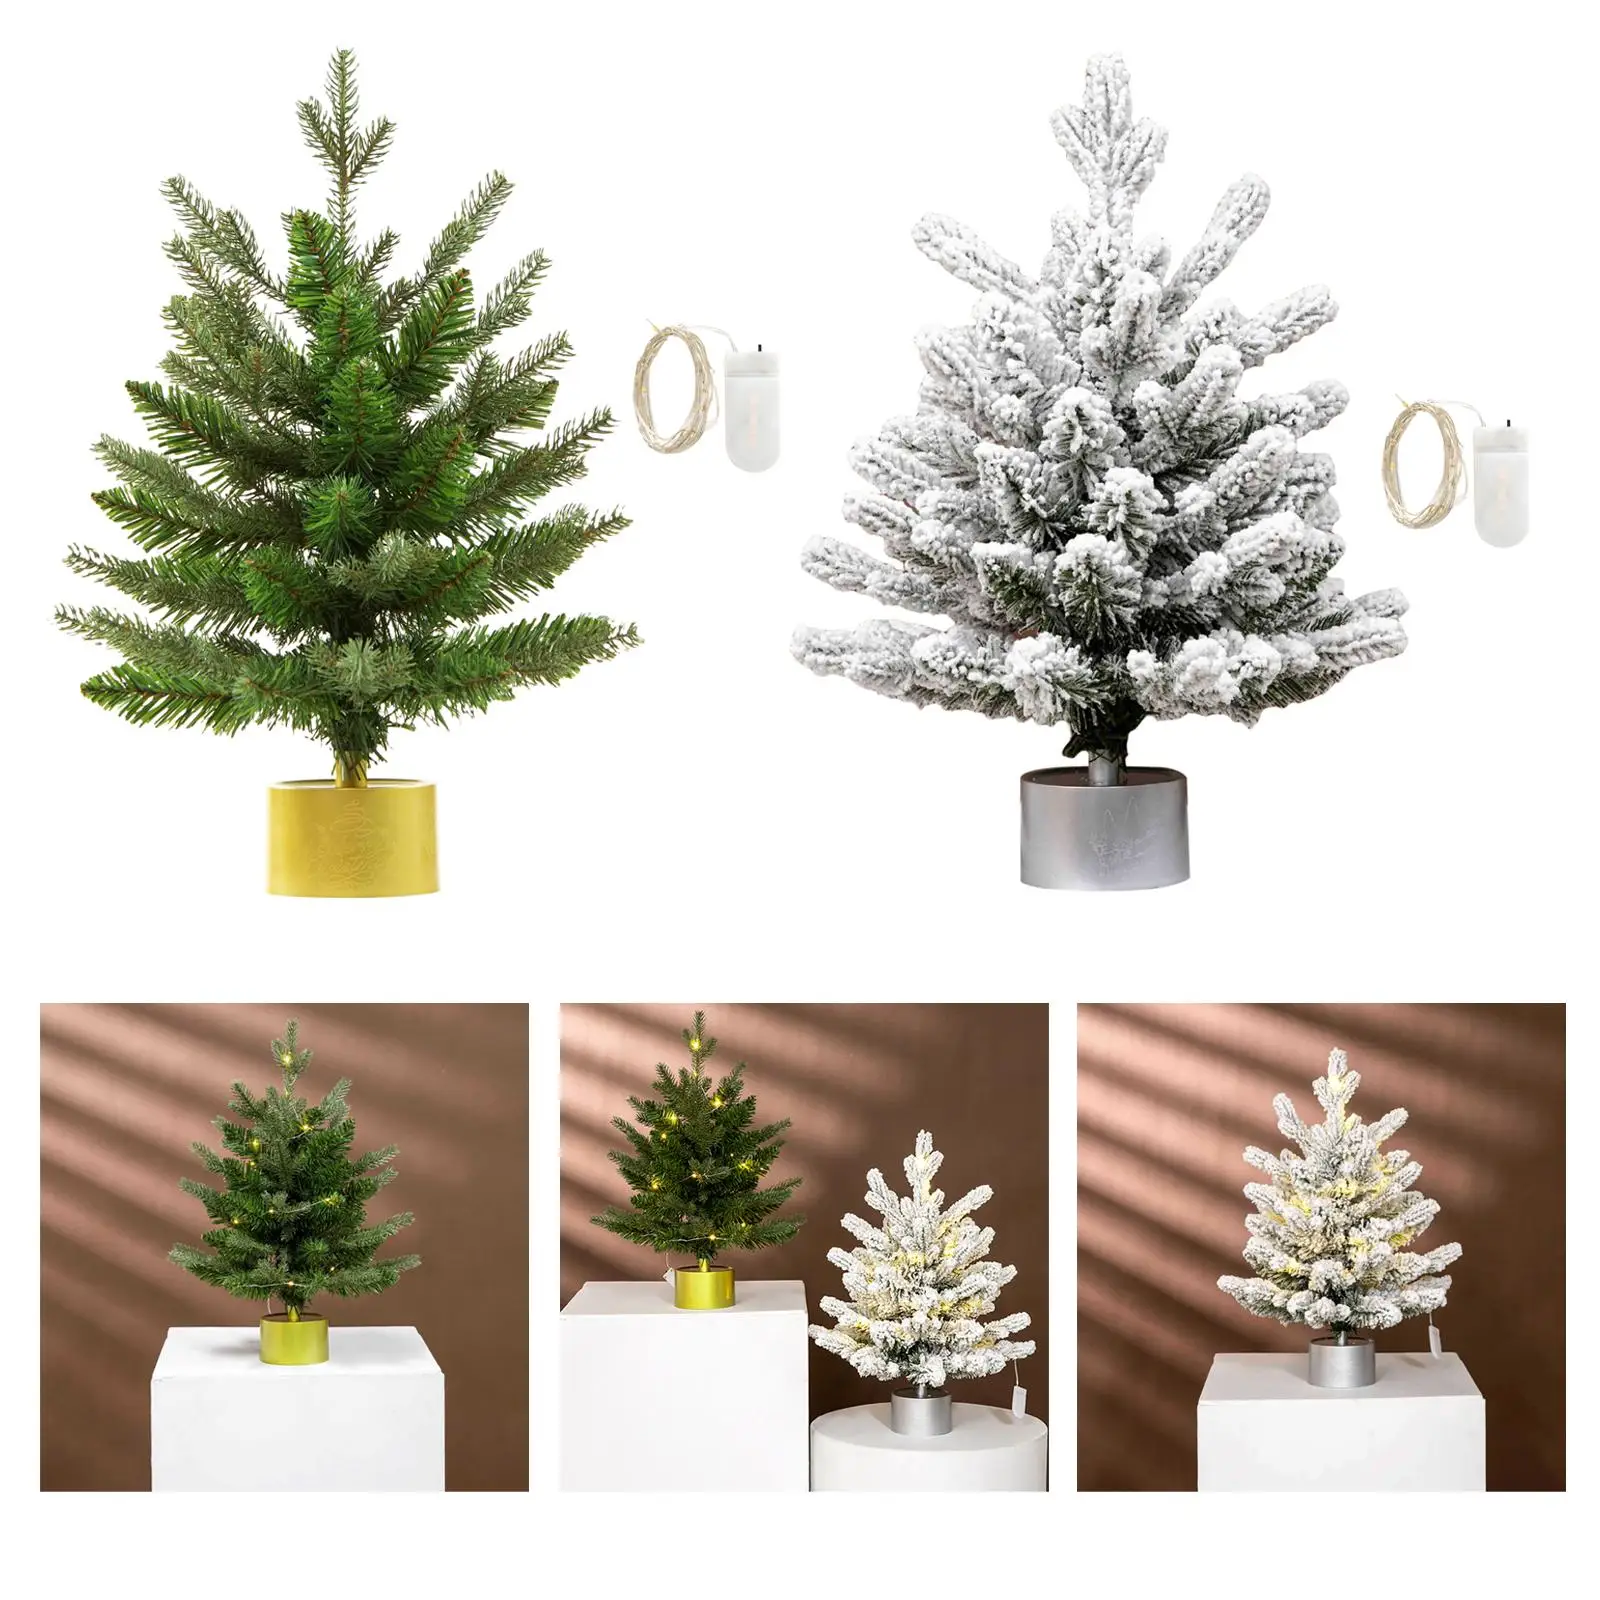 Creative Mini Christmas Tree with Lights Birthday Gift Ornaments Christmas Tree Music Box for Table Top Party Festival Birthday